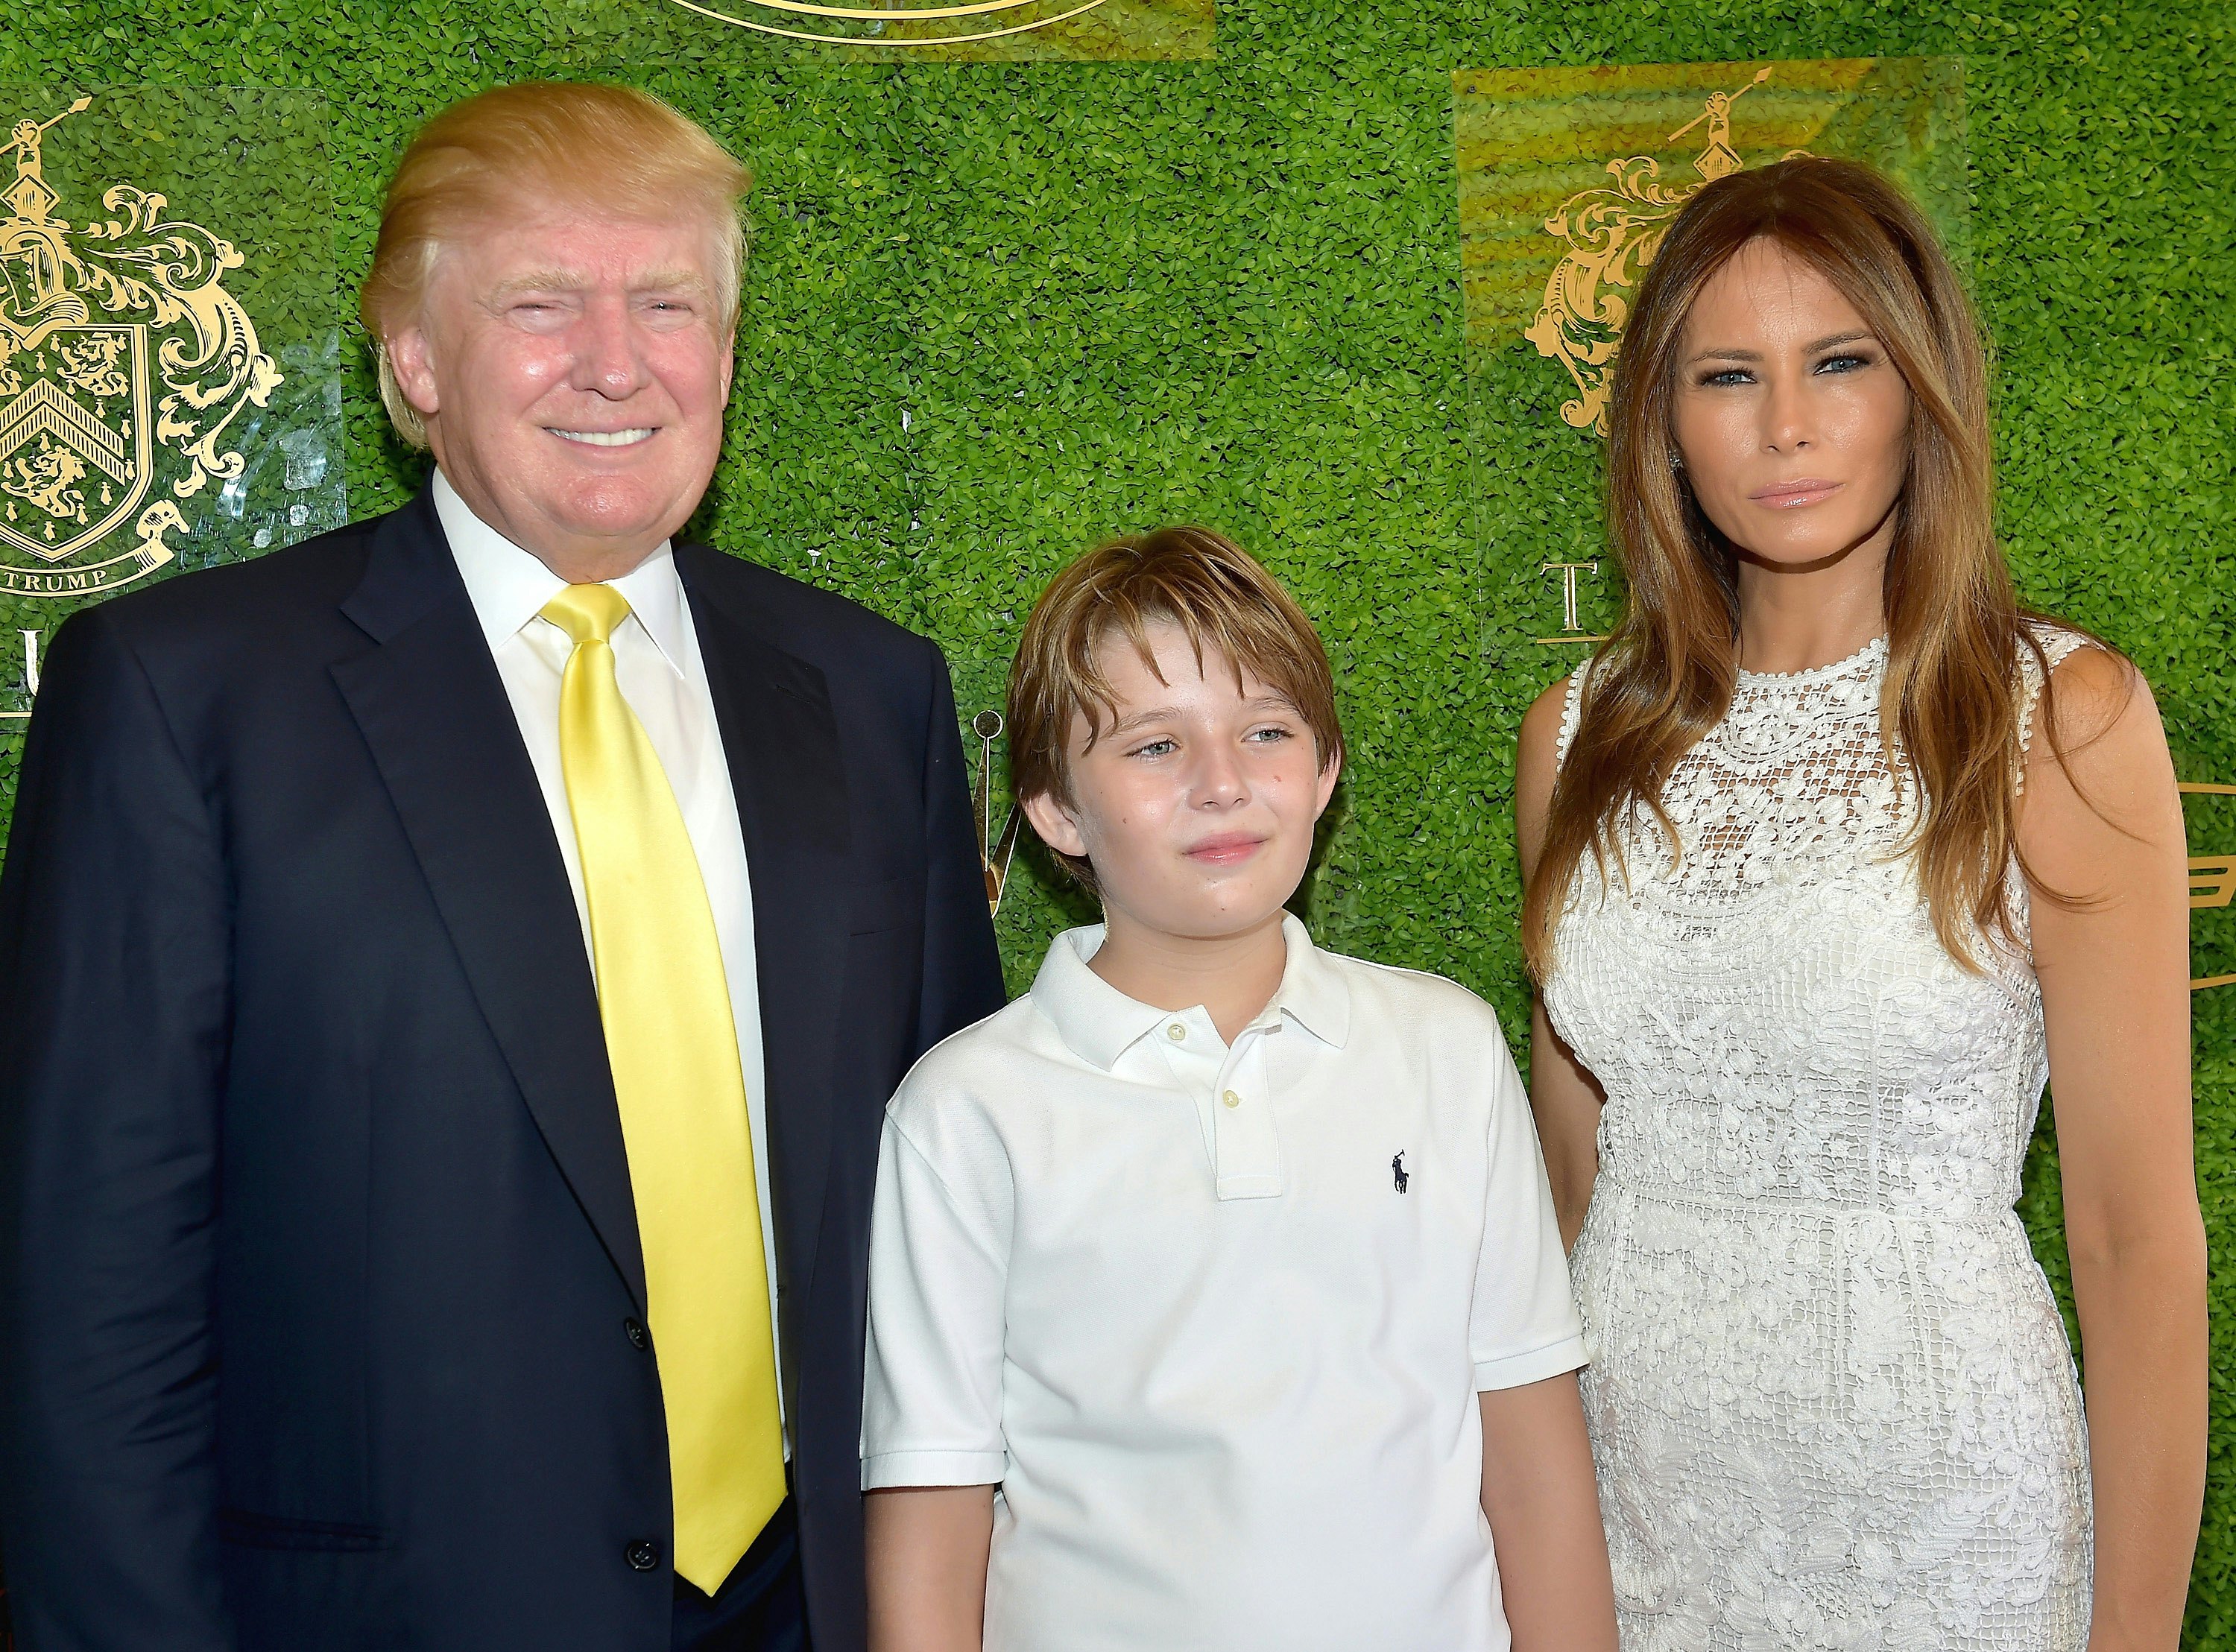 Will Barron Trump Be At The Republican National Convention He S